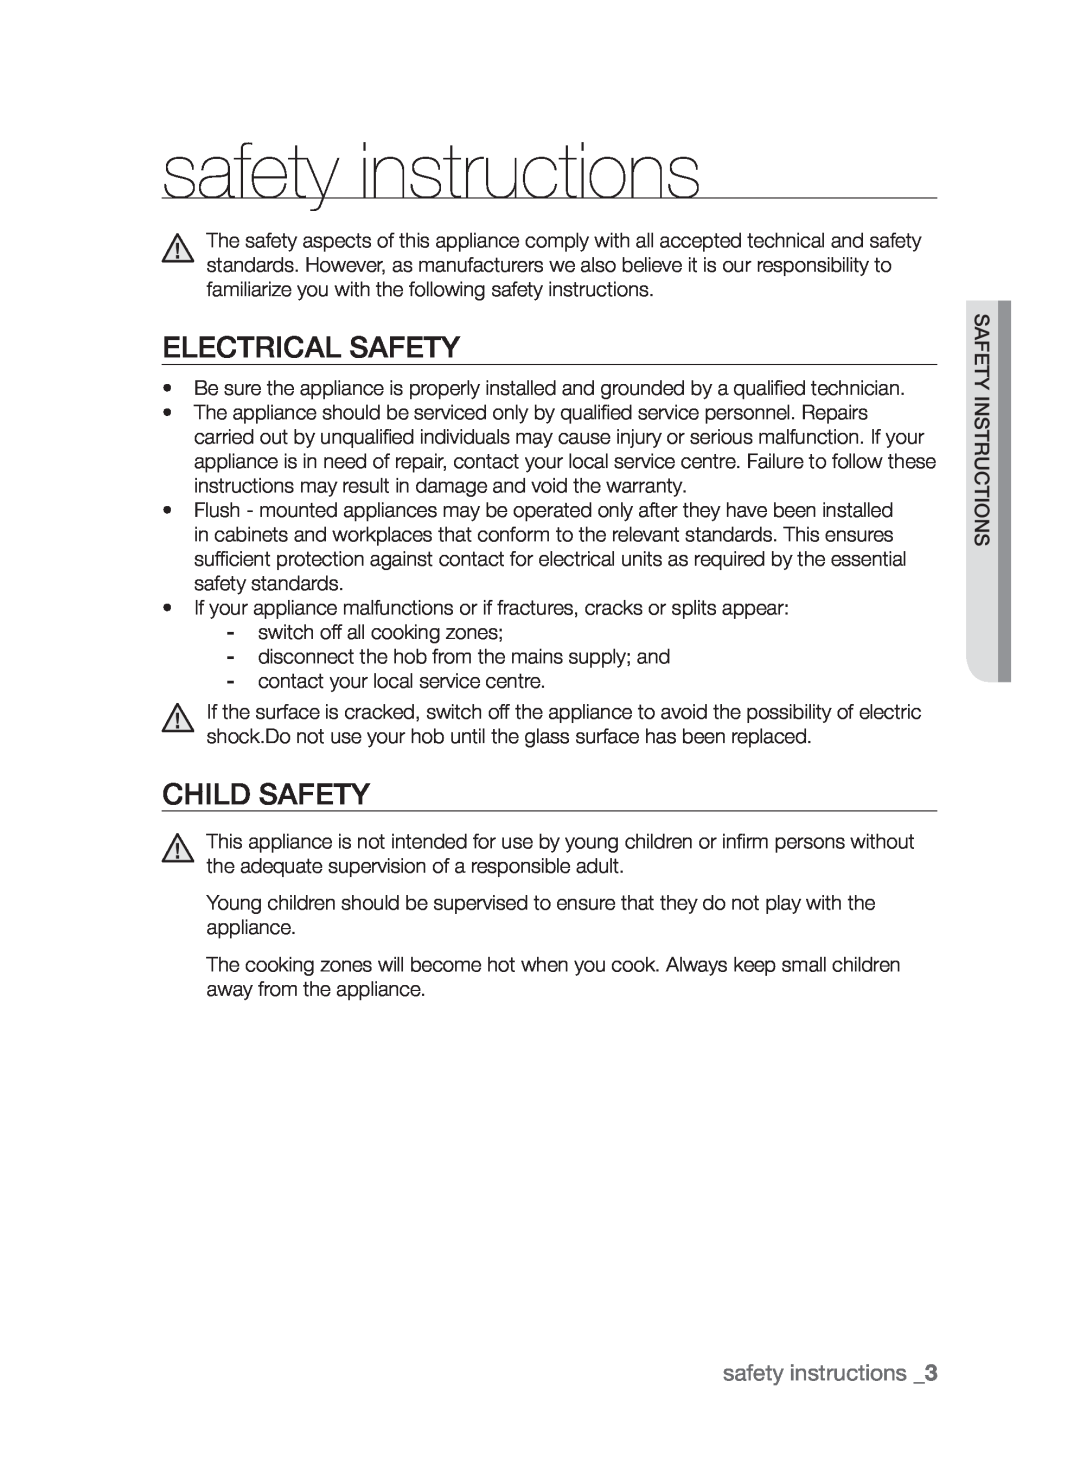 Samsung CTI613GI user manual safety instructions, Electrical safety, Child safety 